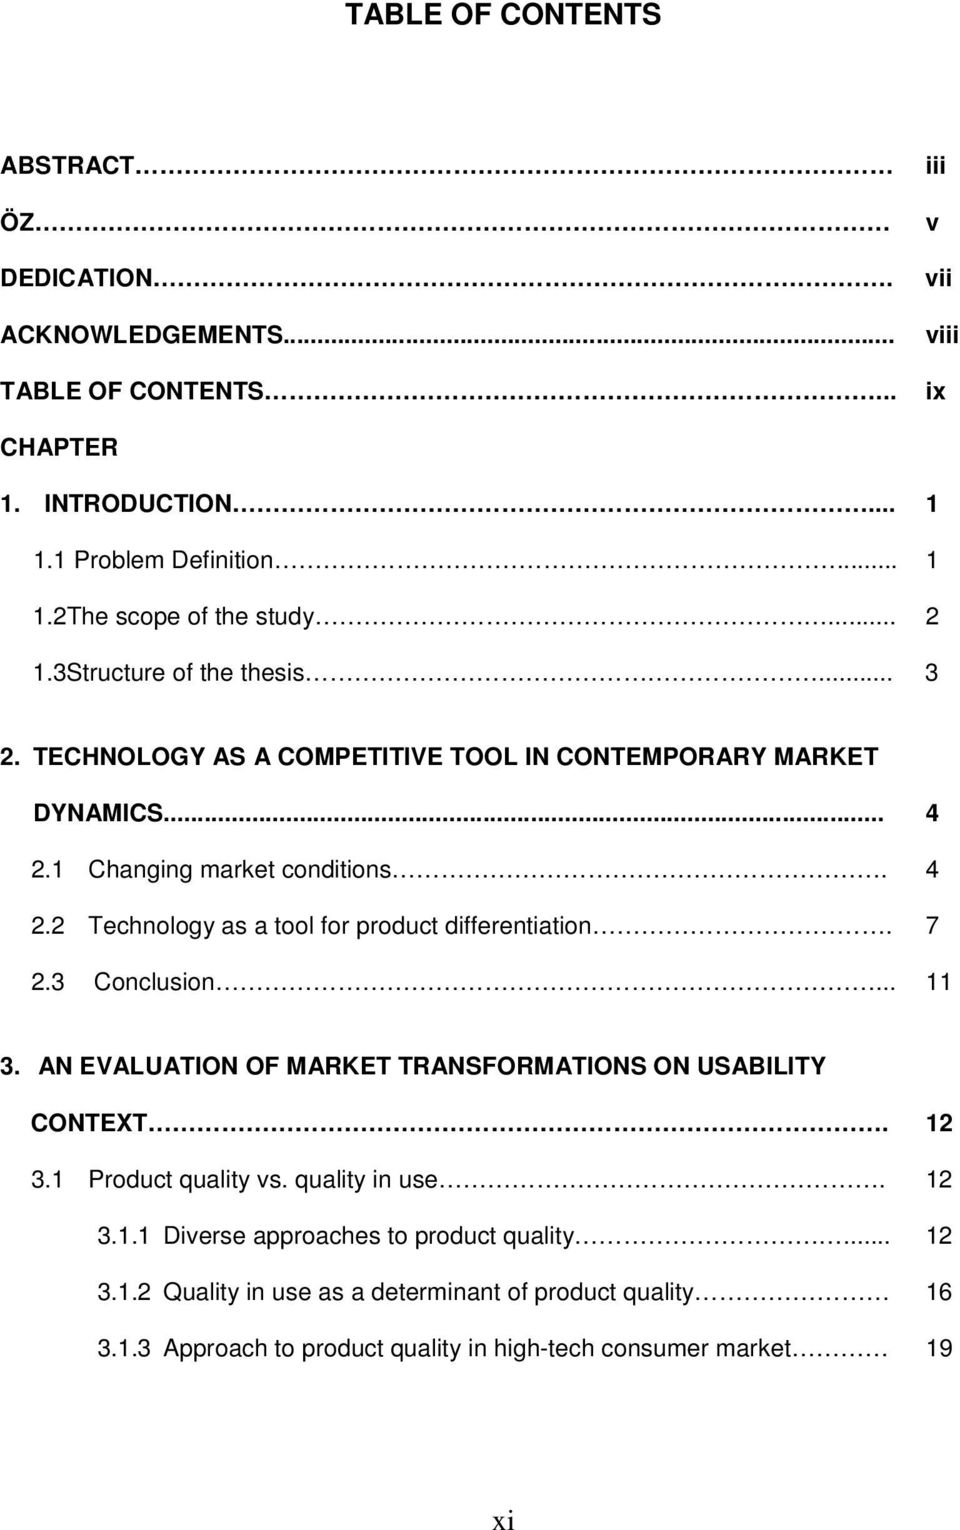 7 2.3 Conclusion... 11 3. AN EVALUATION OF MARKET TRANSFORMATIONS ON USABILITY CONTEXT. 12 3.1 Product quality vs. quality in use. 12 3.1.1 Diverse approaches to product quality.